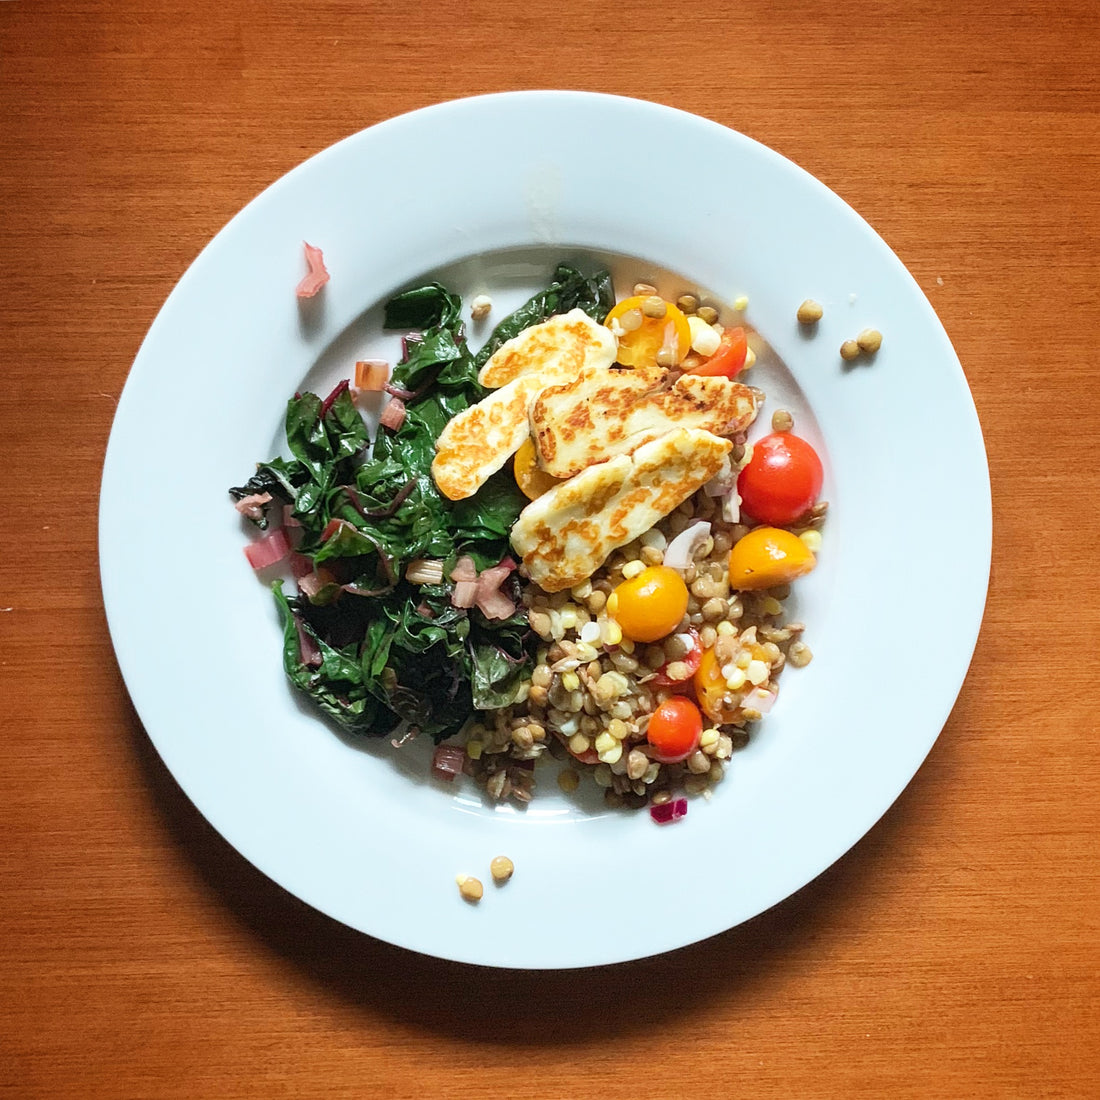 Sweet Corn and Lentil Salad with Grilled Halloumi